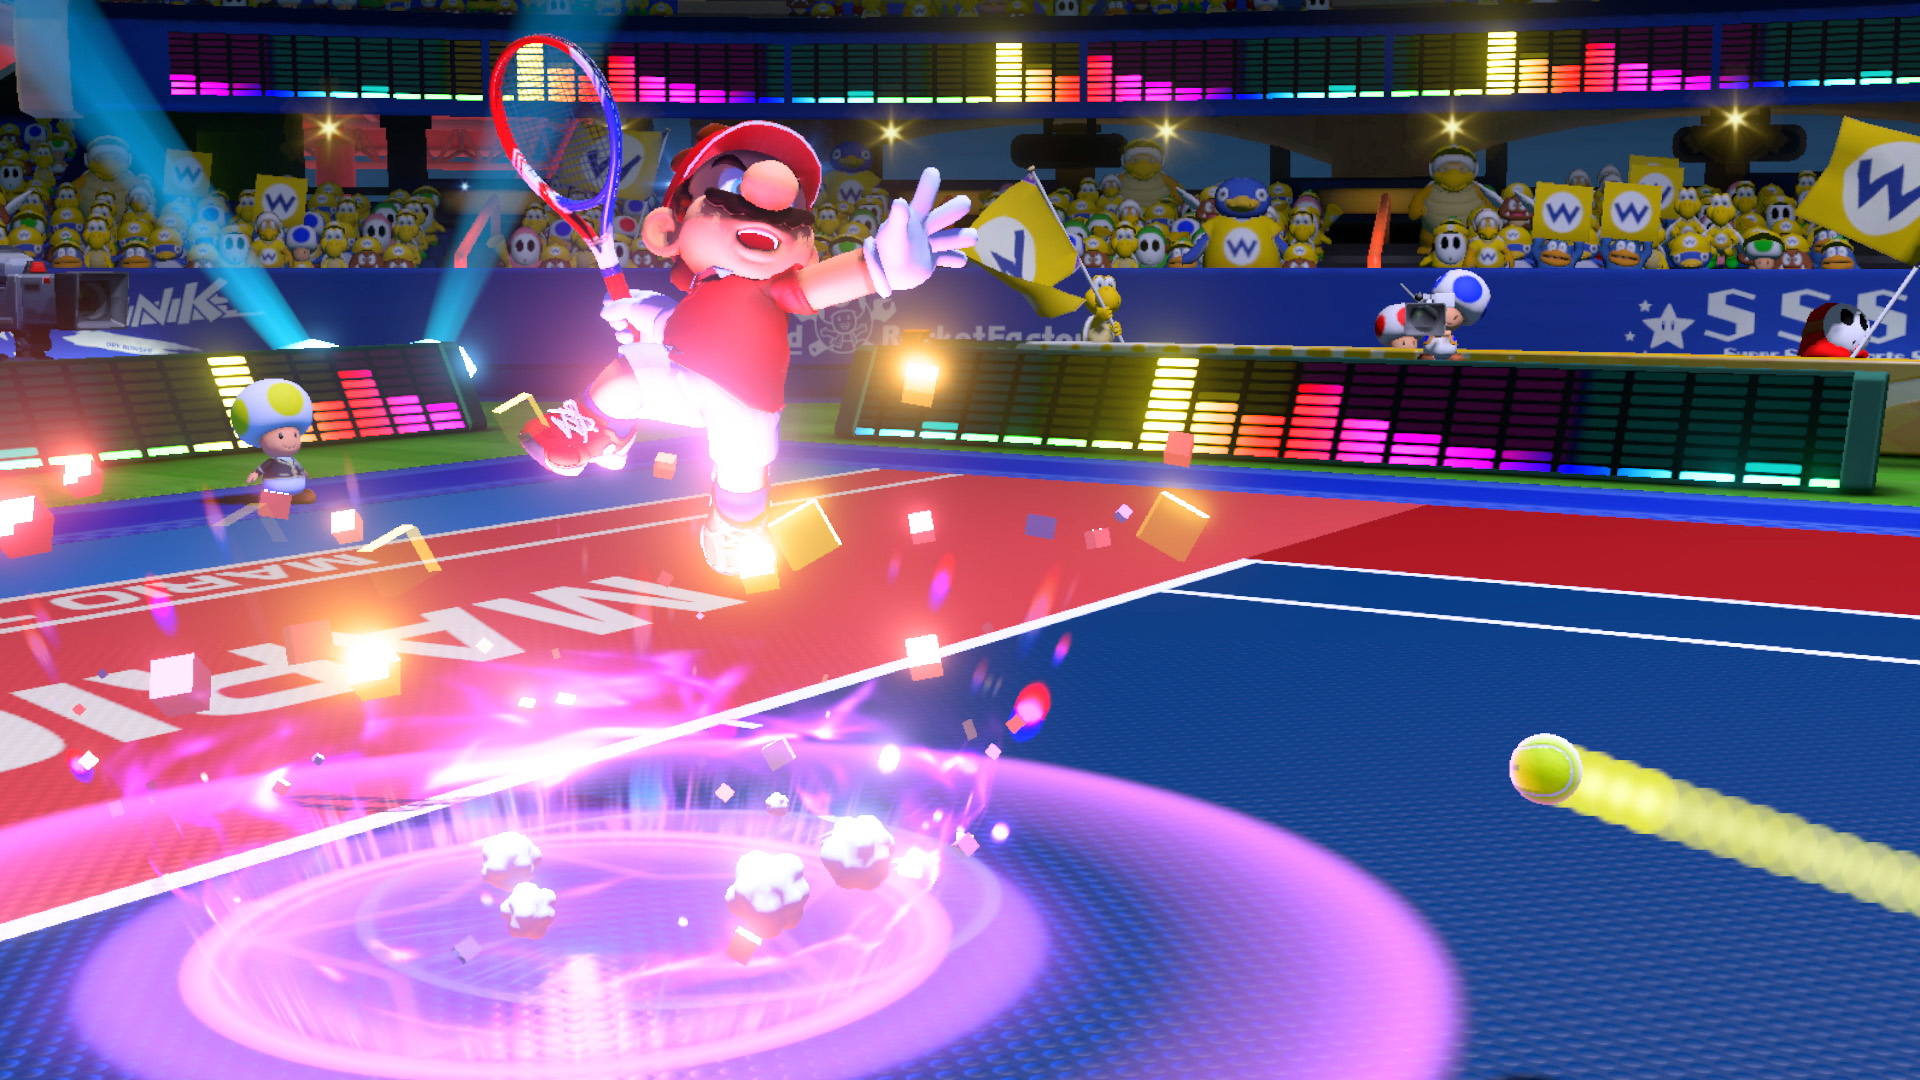 Nintendo Switch Online members can play Mario Tennis Aces for FREE right now